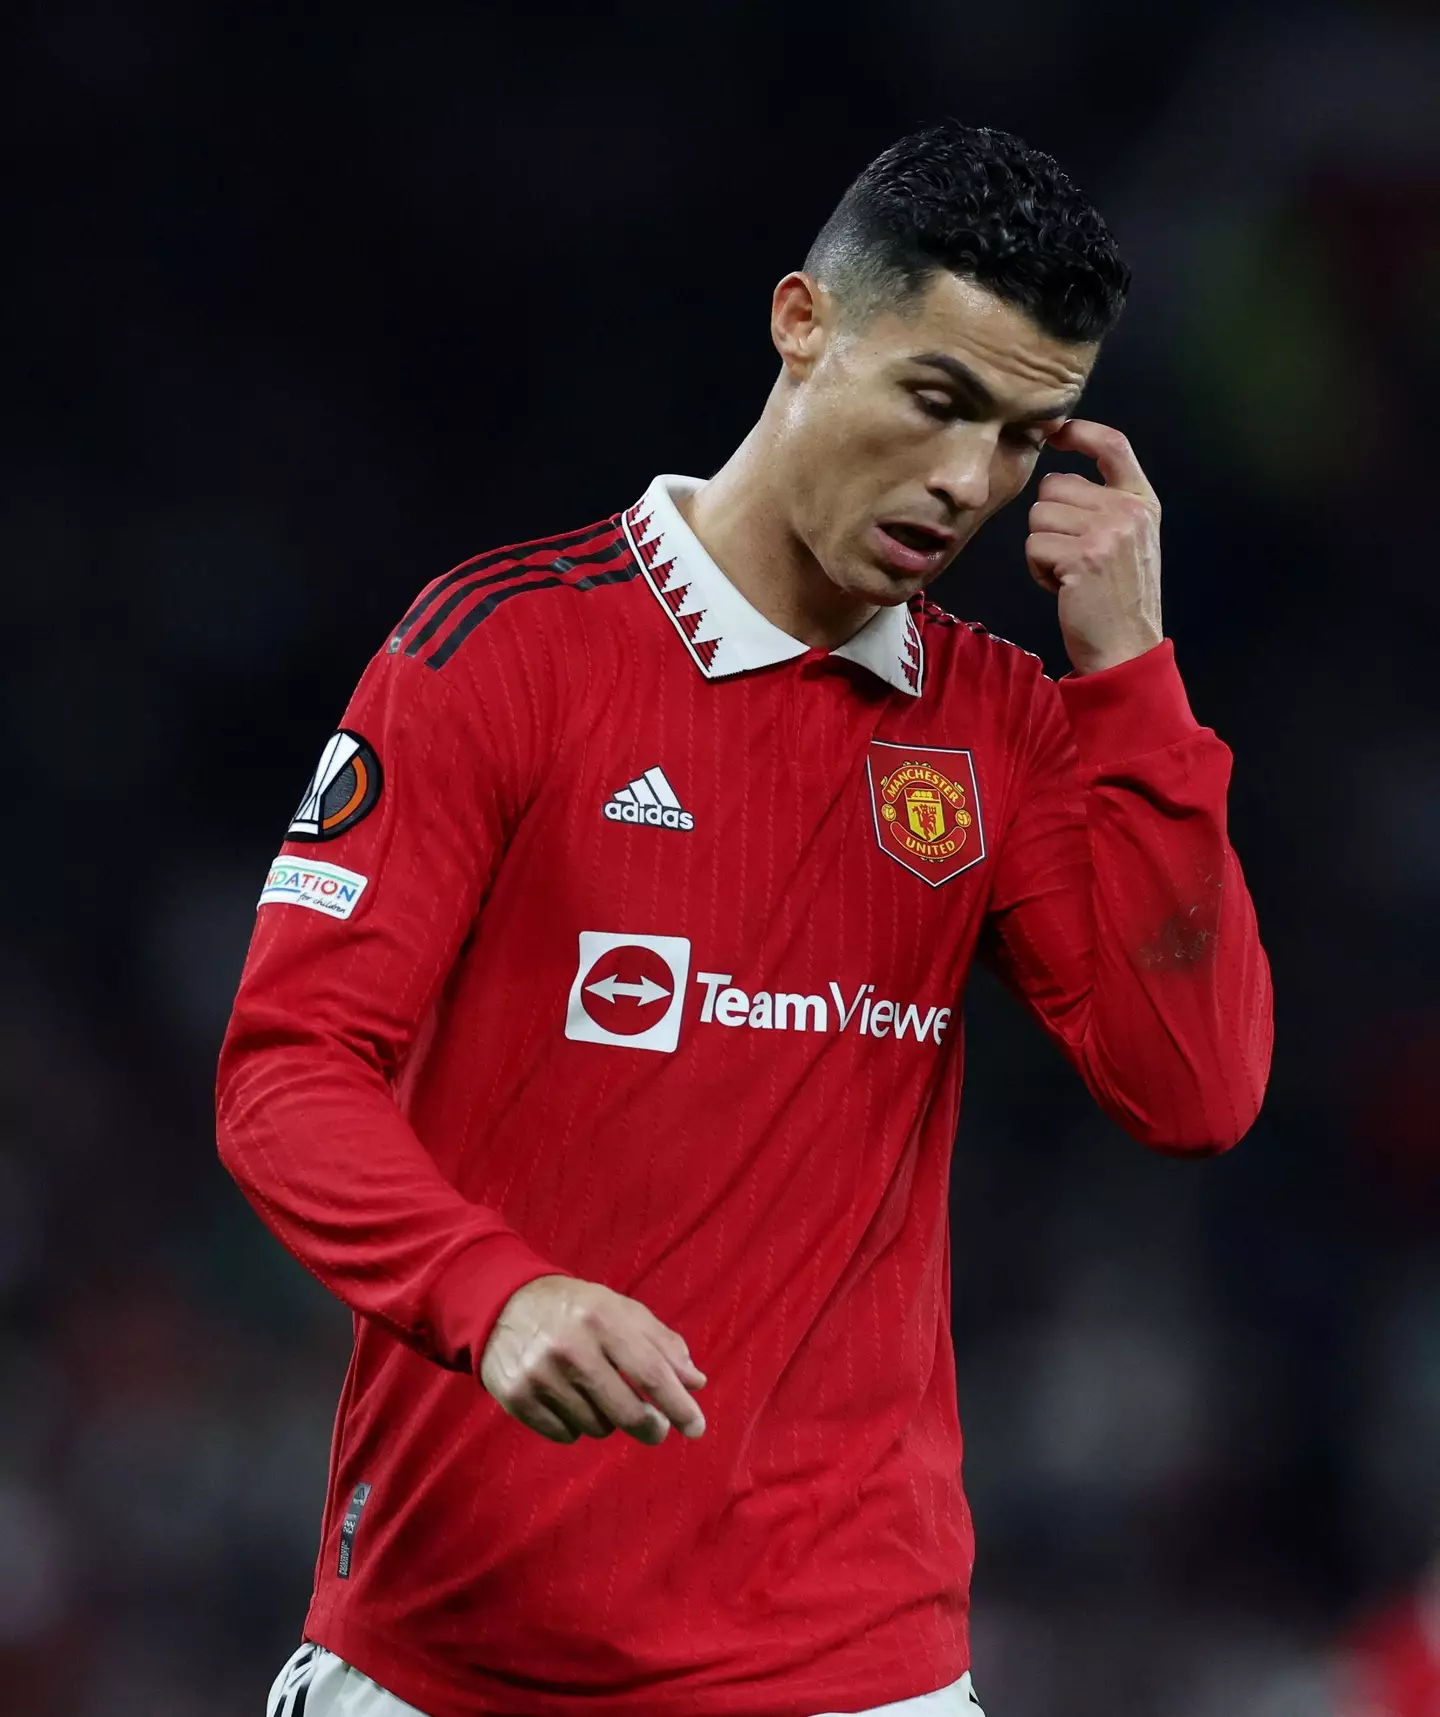 Ronaldo has left Manchester United by mutual consent (Image: Alamy)